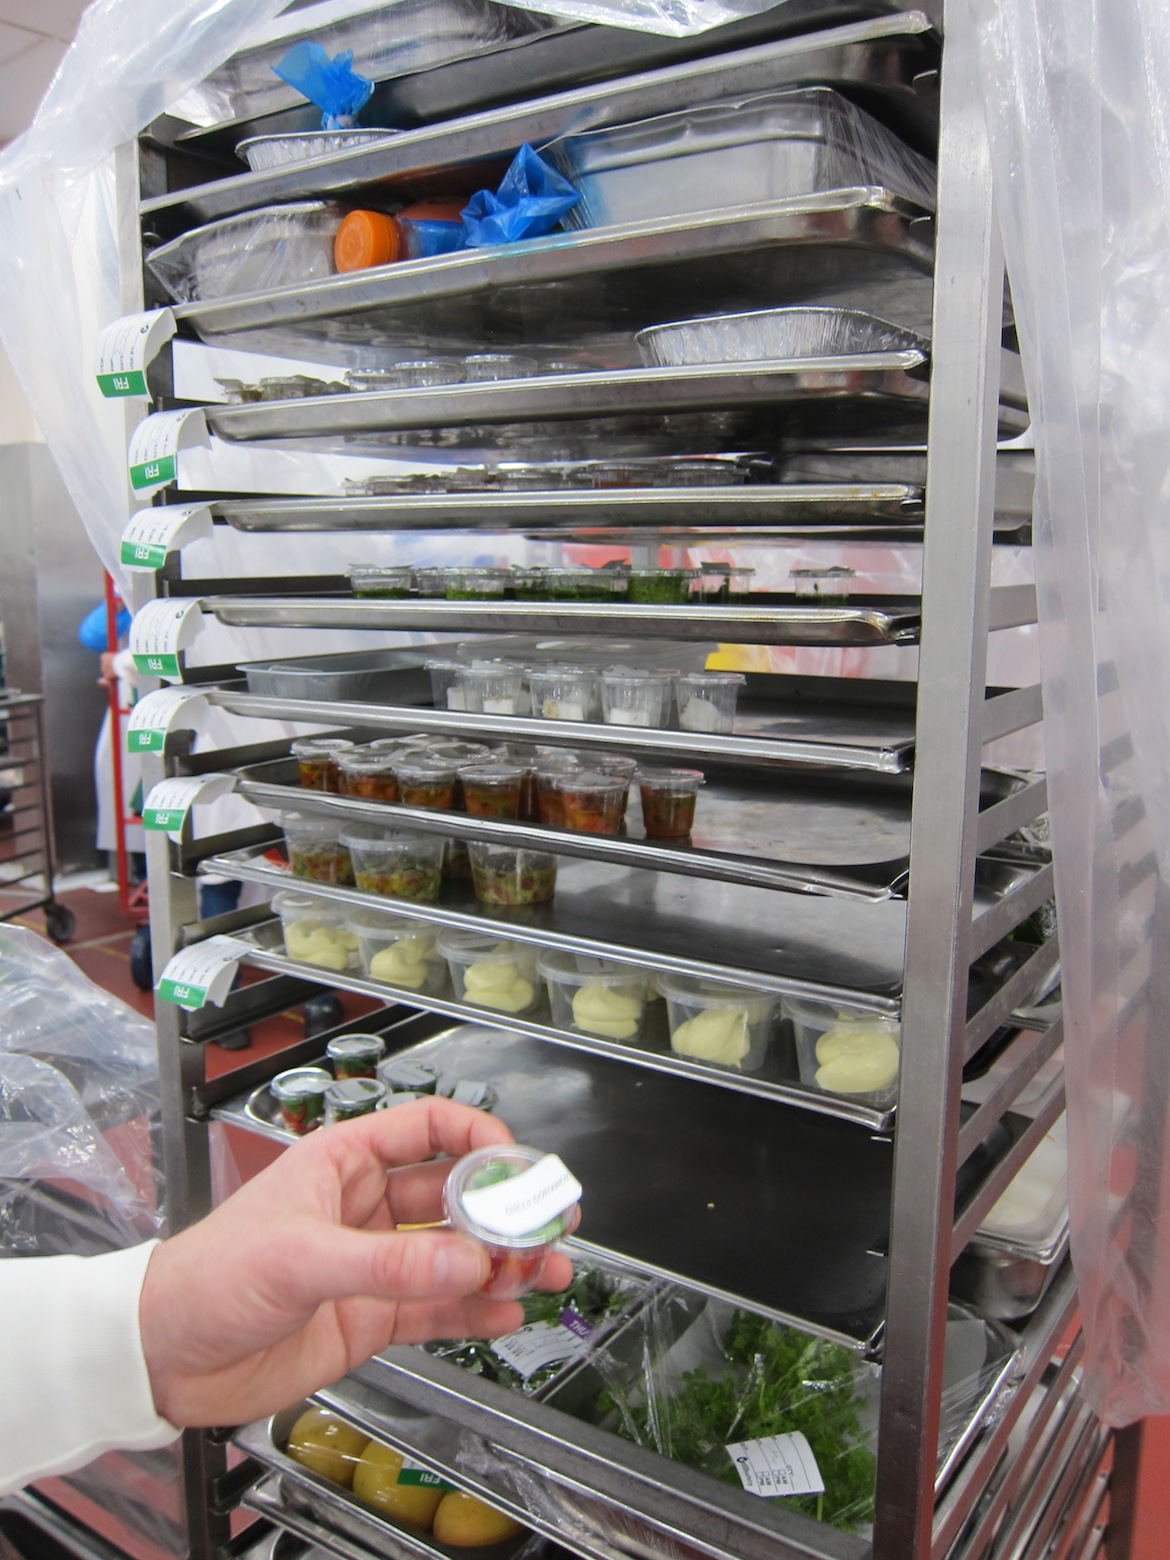 Every garnish or sauce is labelled and placed in individual tubs before going on board the aircraft. (Jordan Chong)